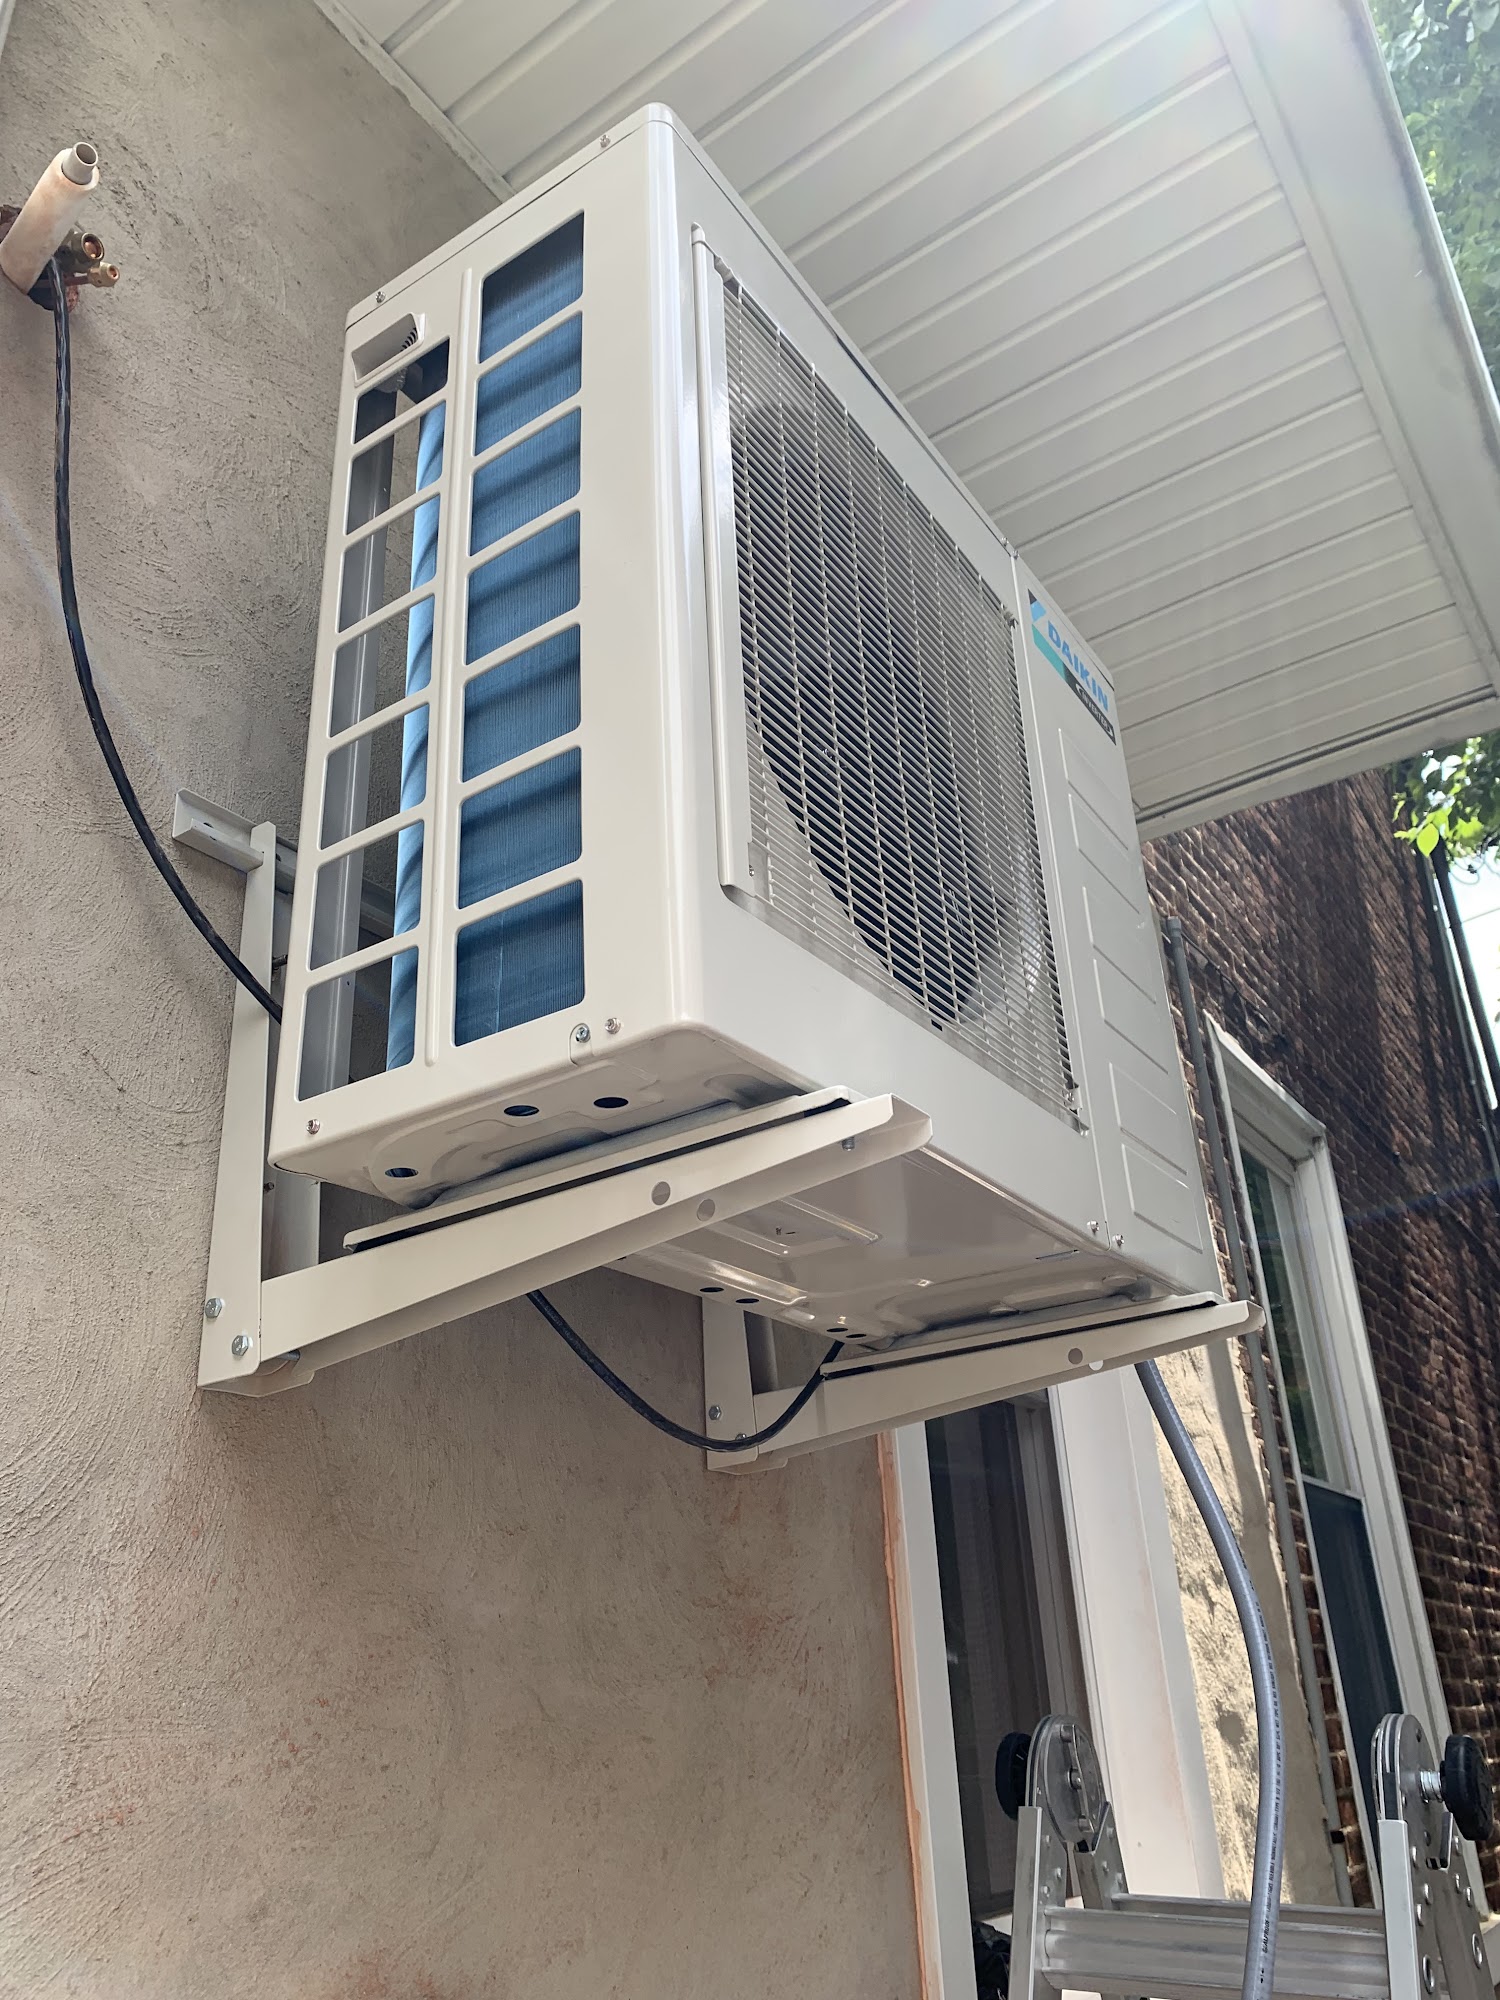 Reliance Heating & Air Conditioning, LLC